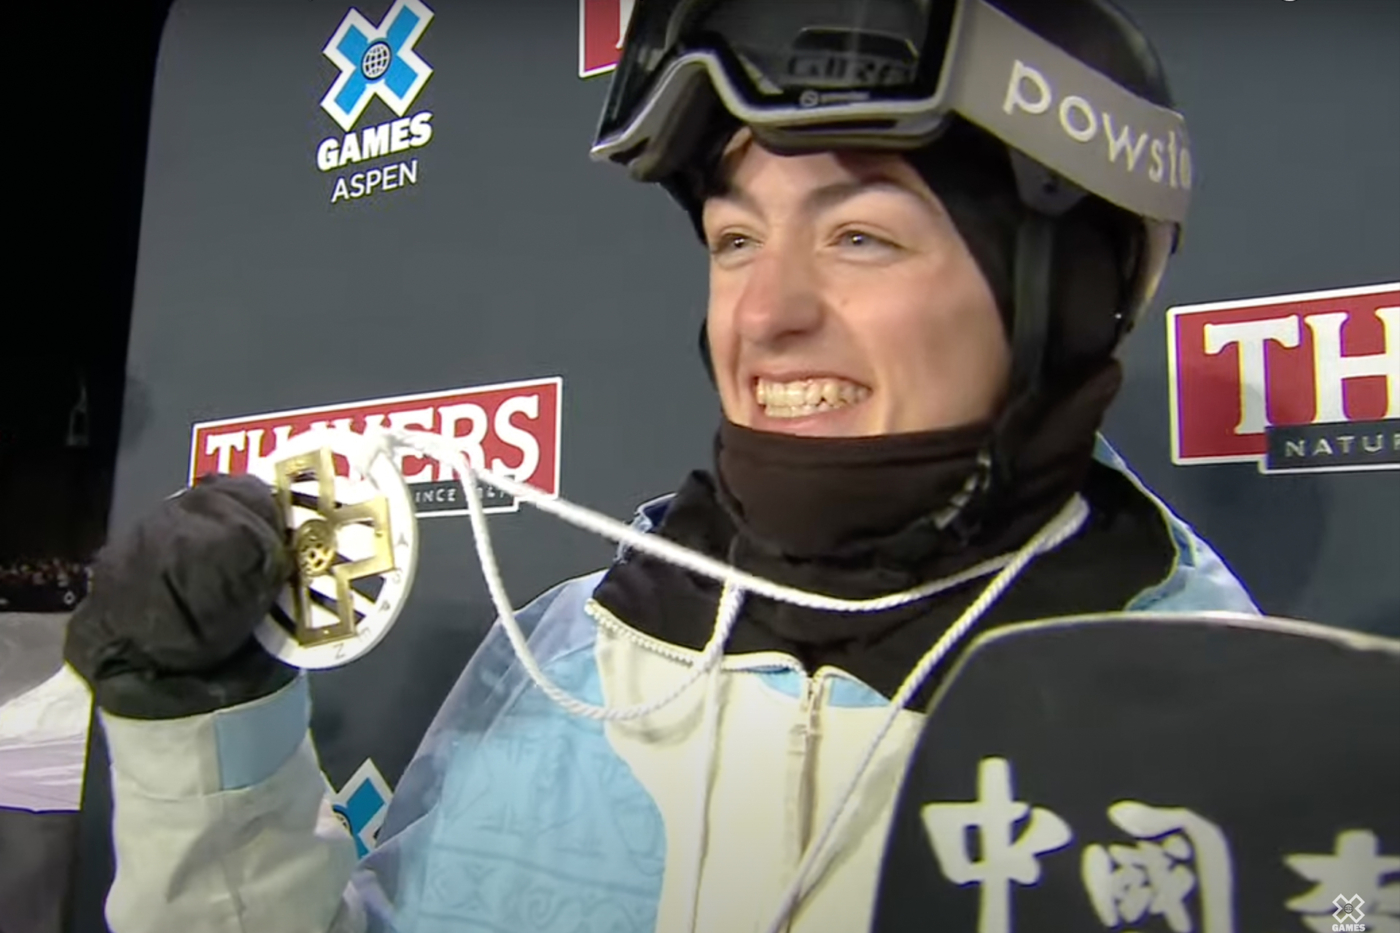 Liam Brearley wins gold at X Games